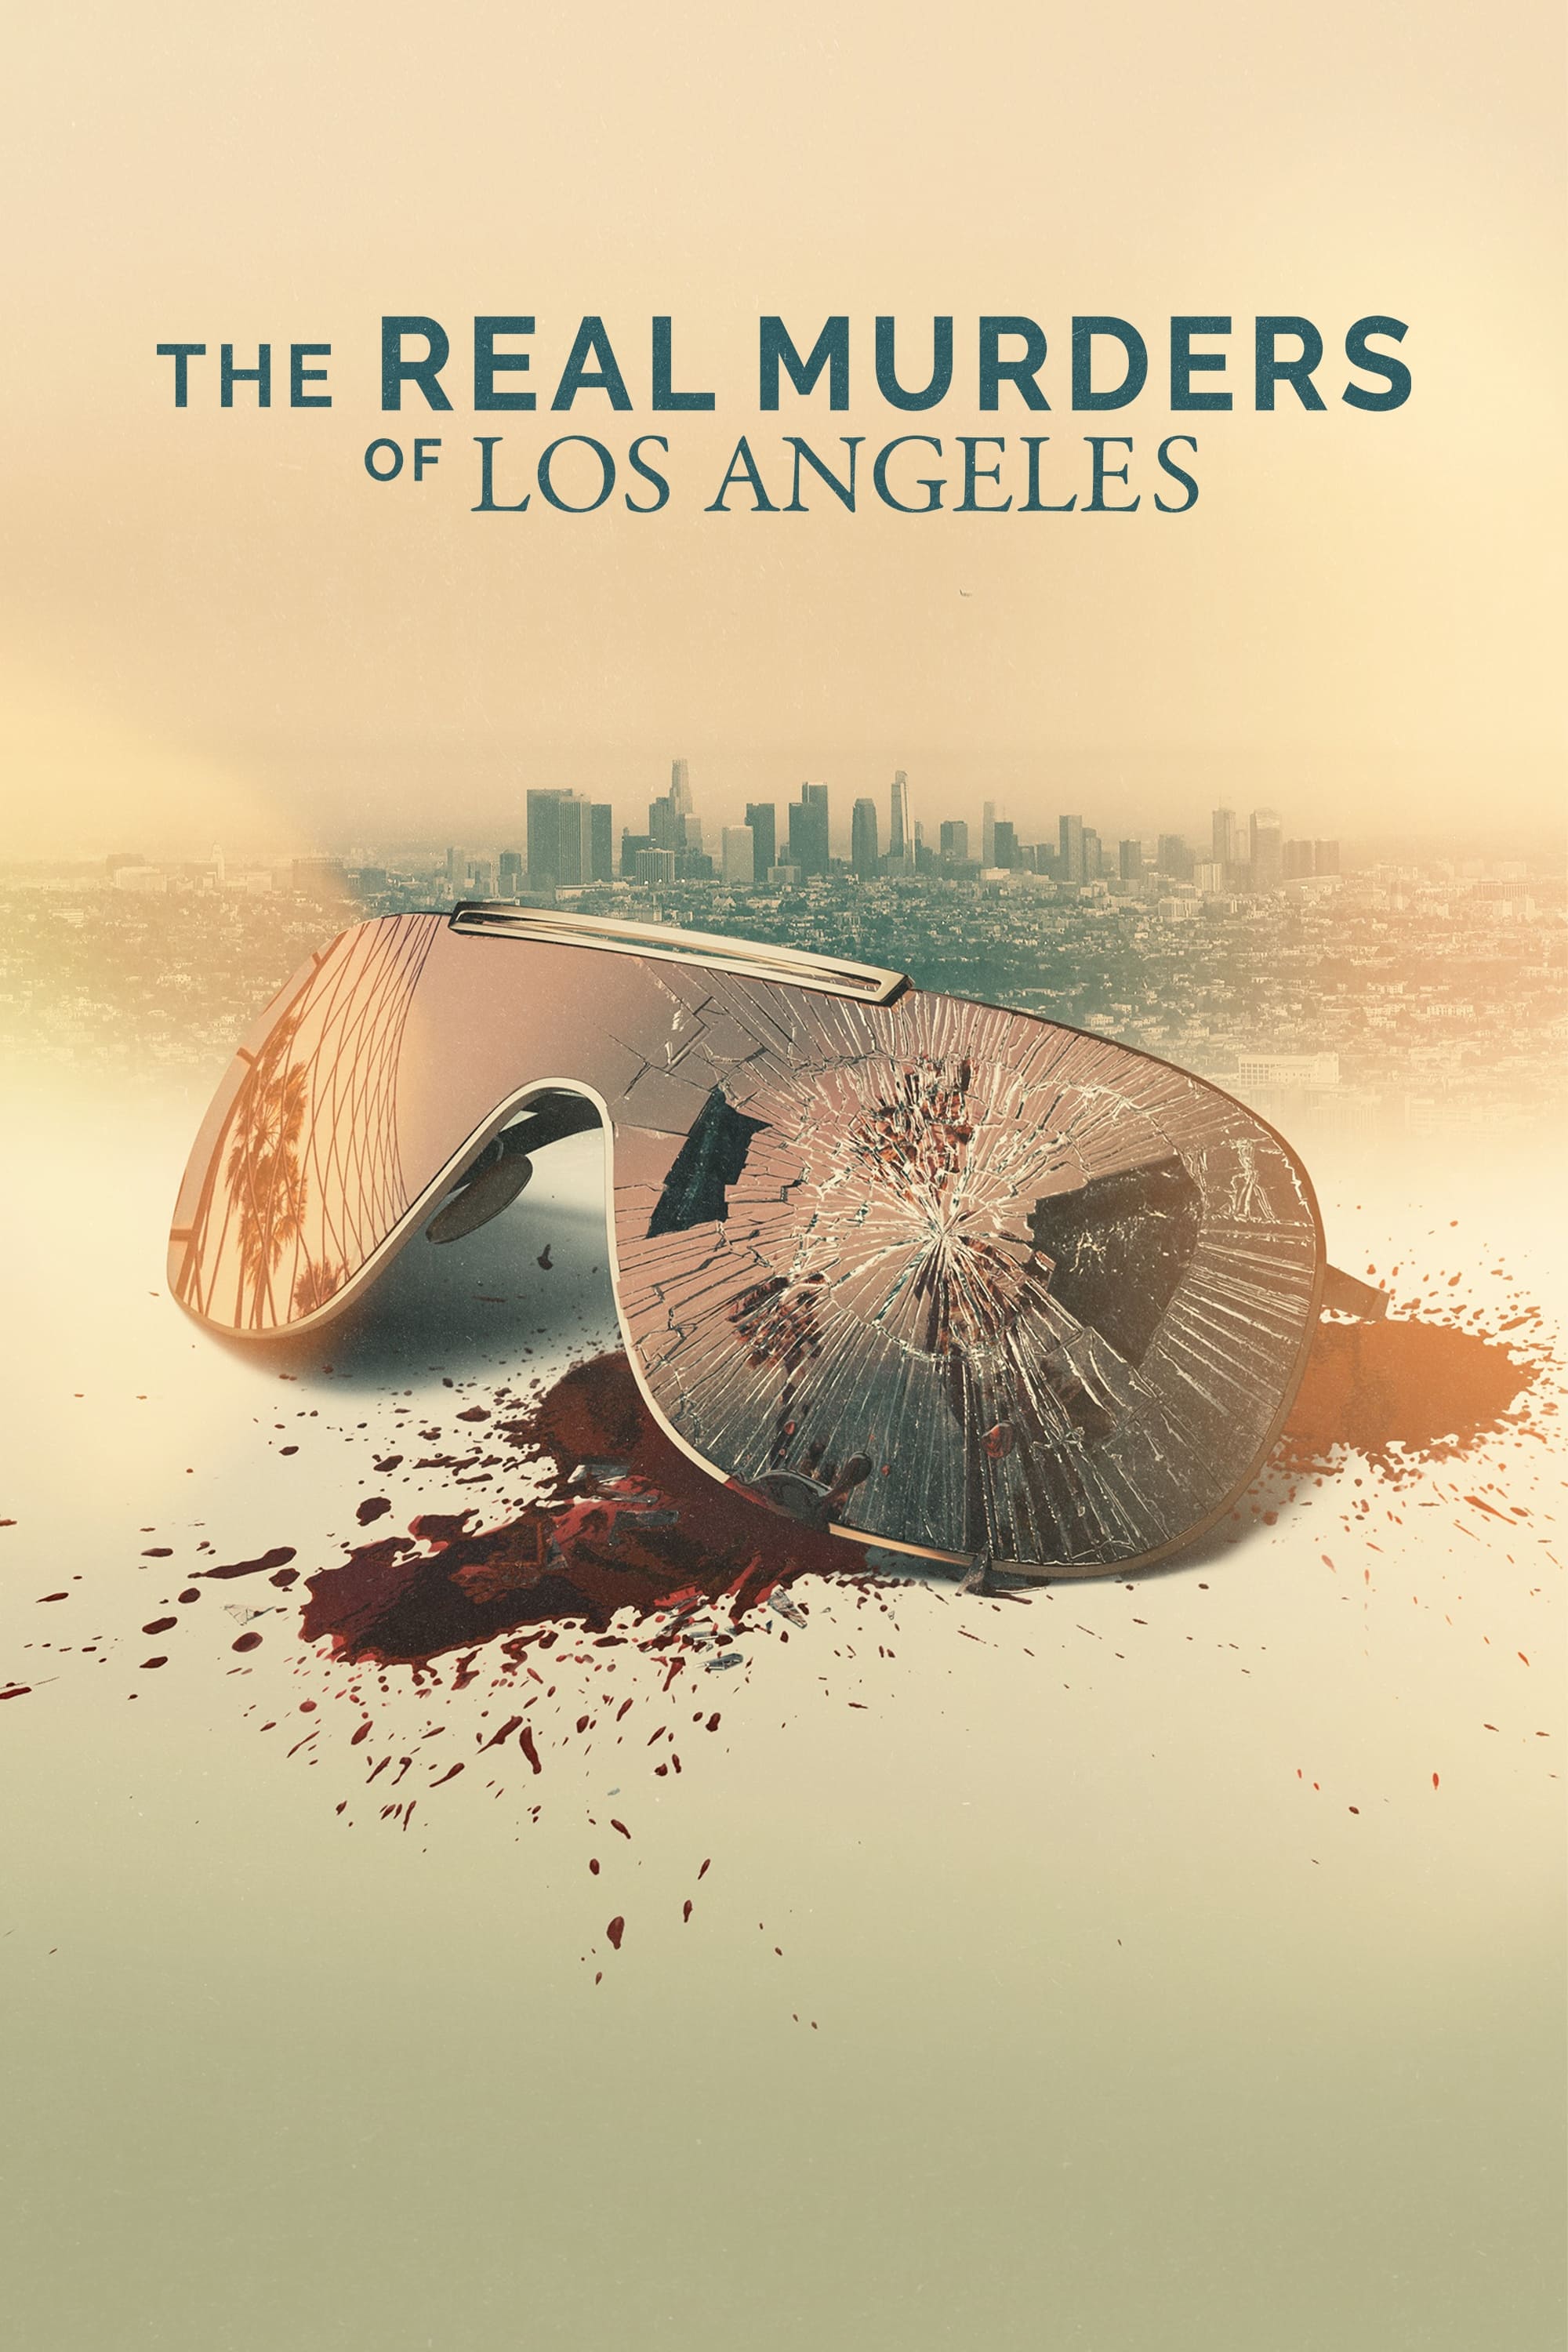 The Real Murders of Los Angeles